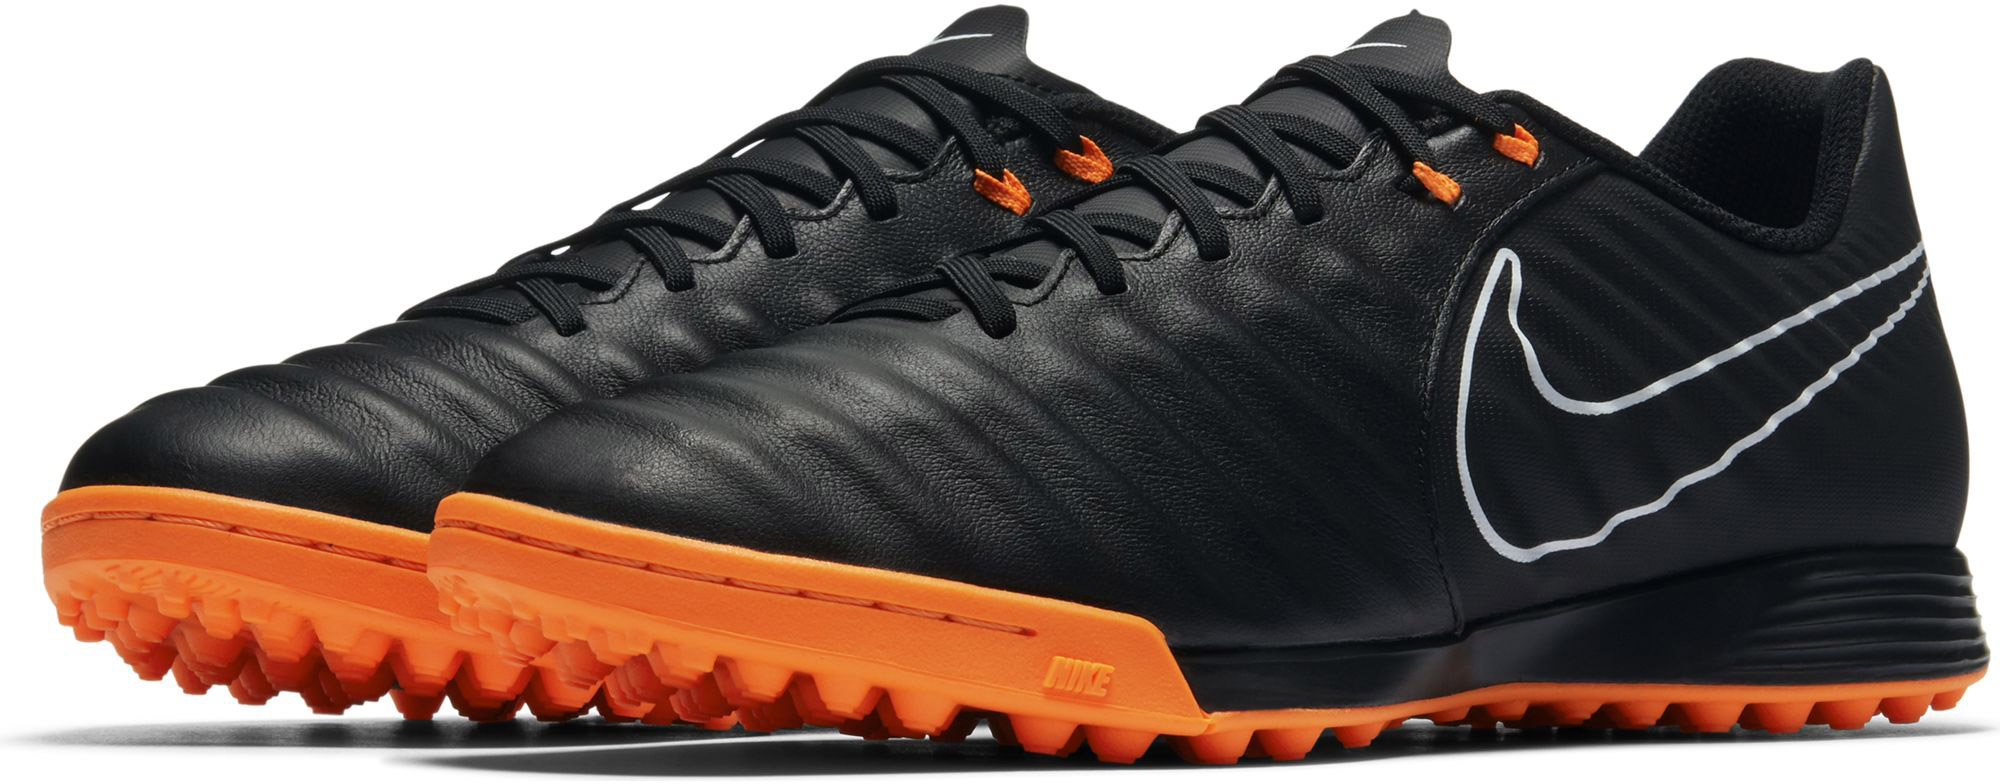 Nike Tiempo Ligera IV AG Pro Chaussures, Homme: